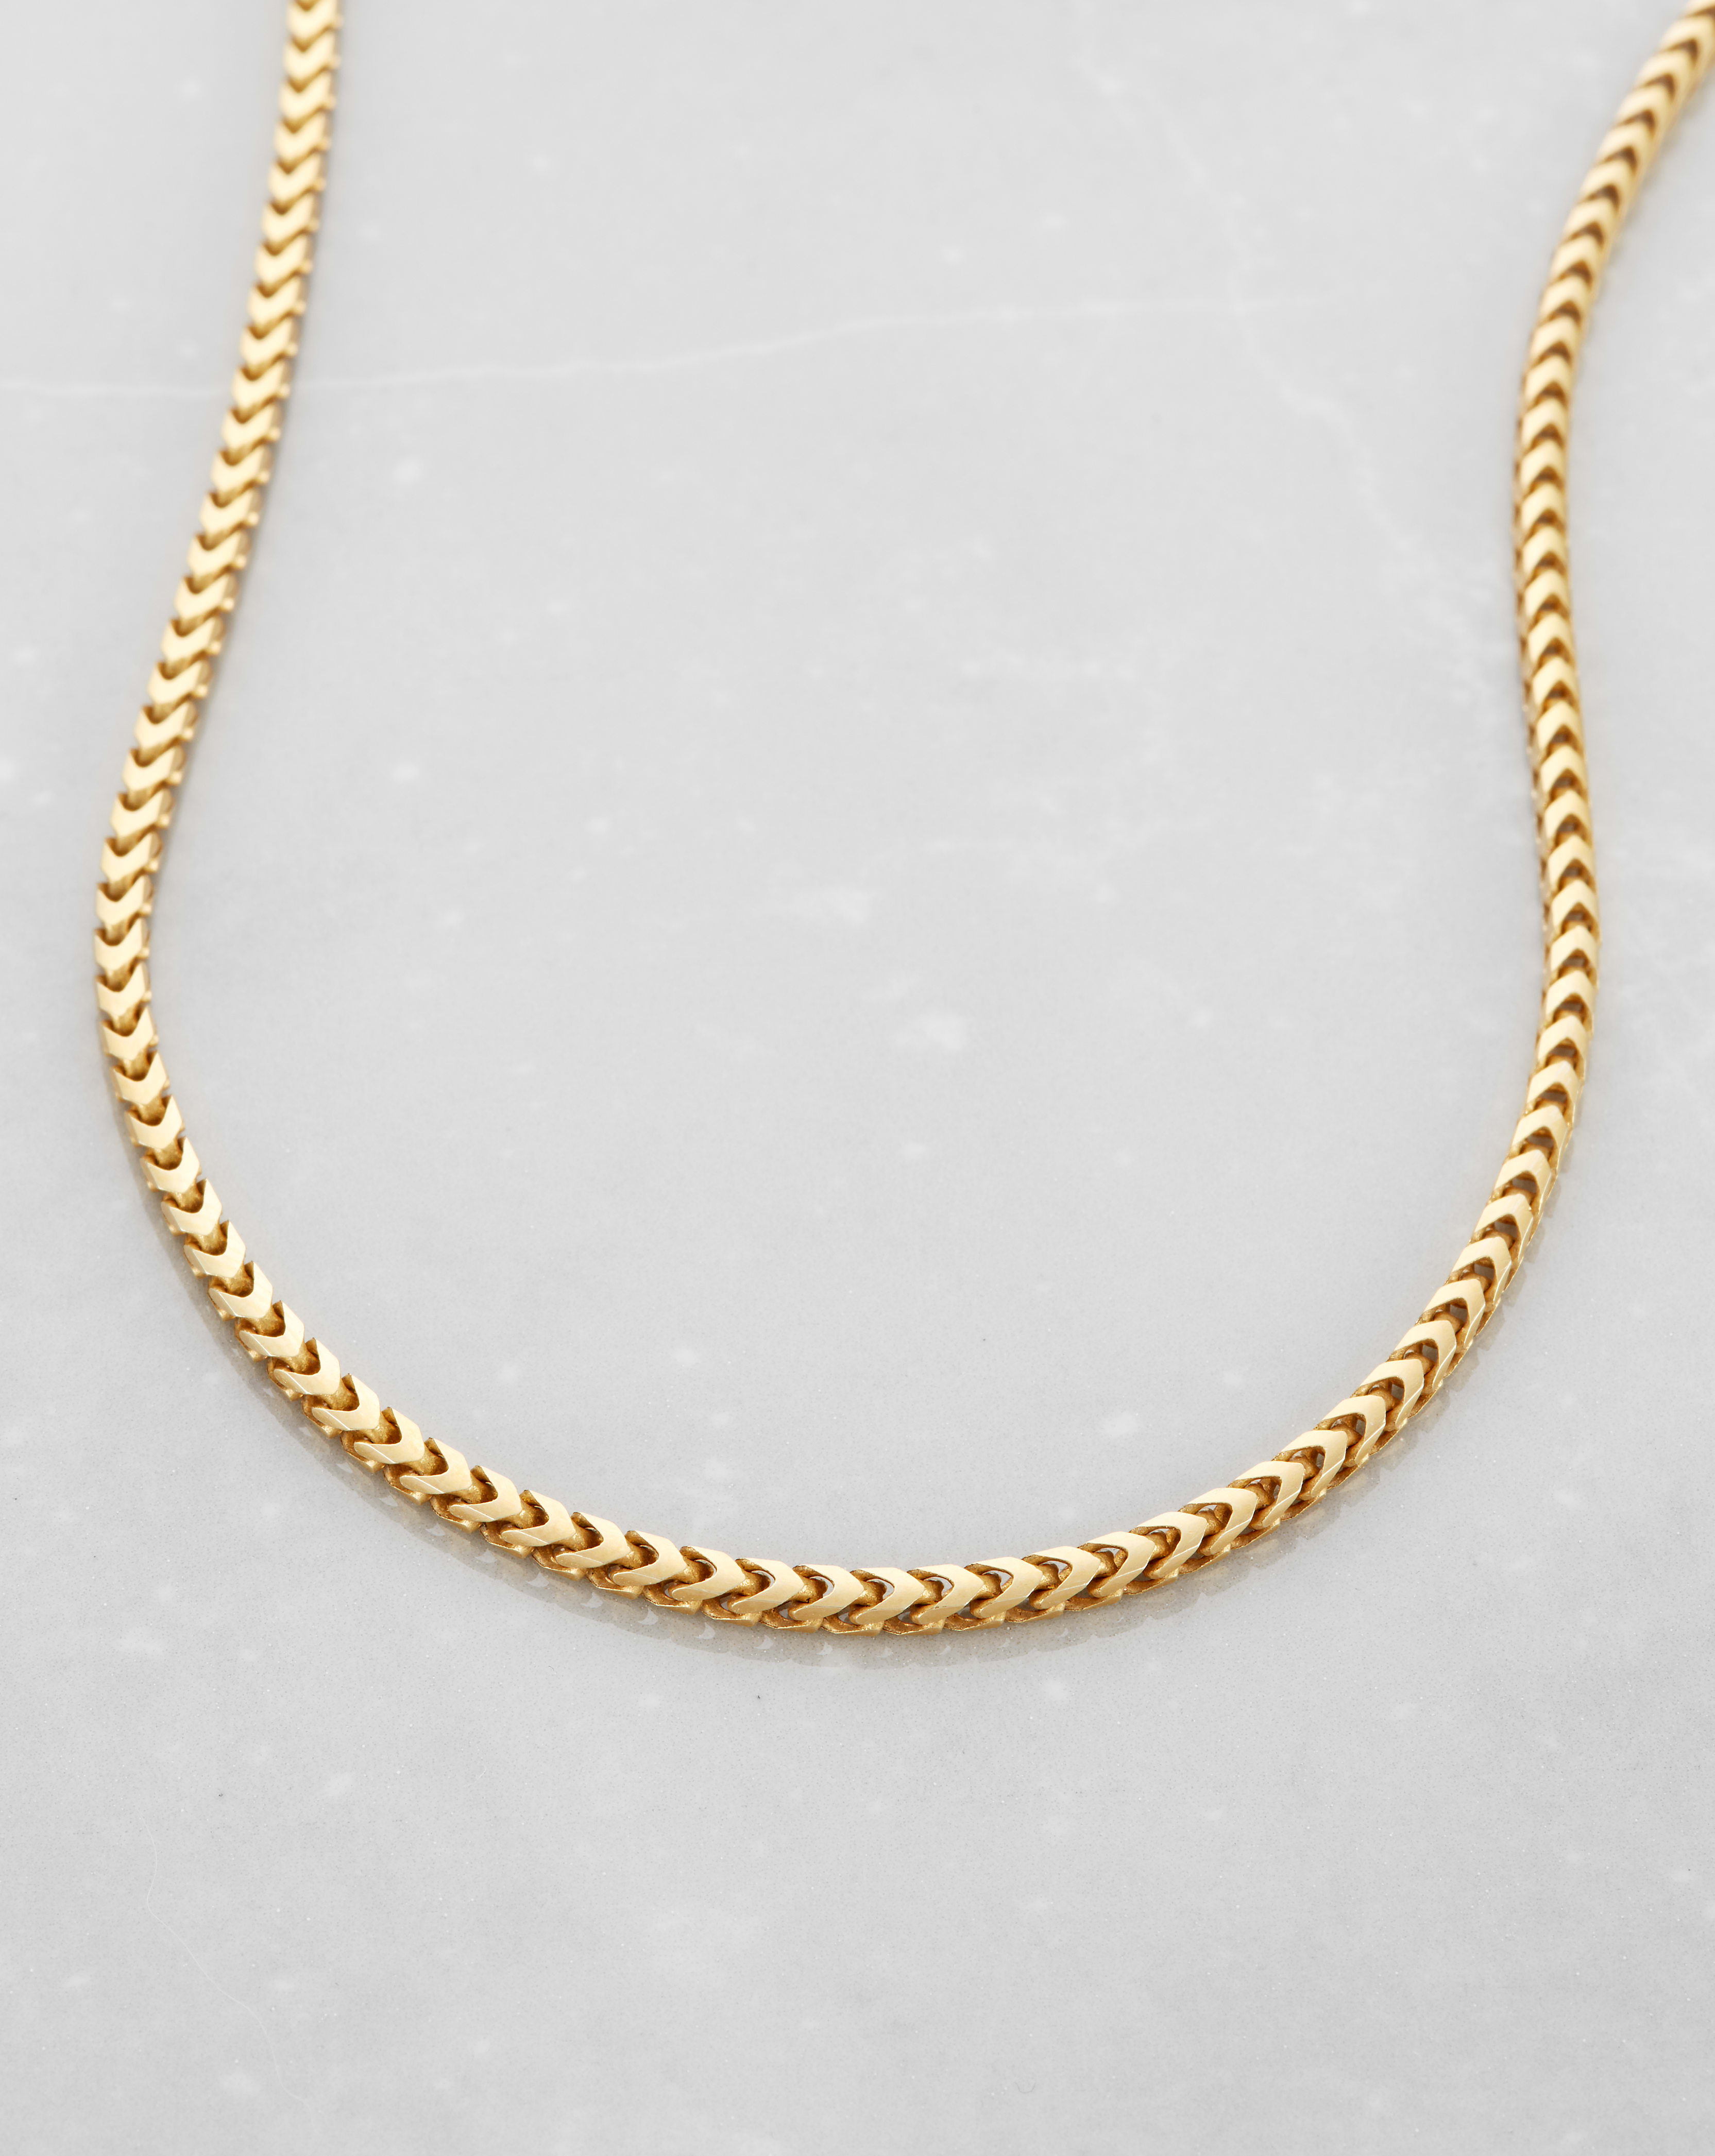 Image Franco Chain - 2.5mm Gold - Made with Precious Metals